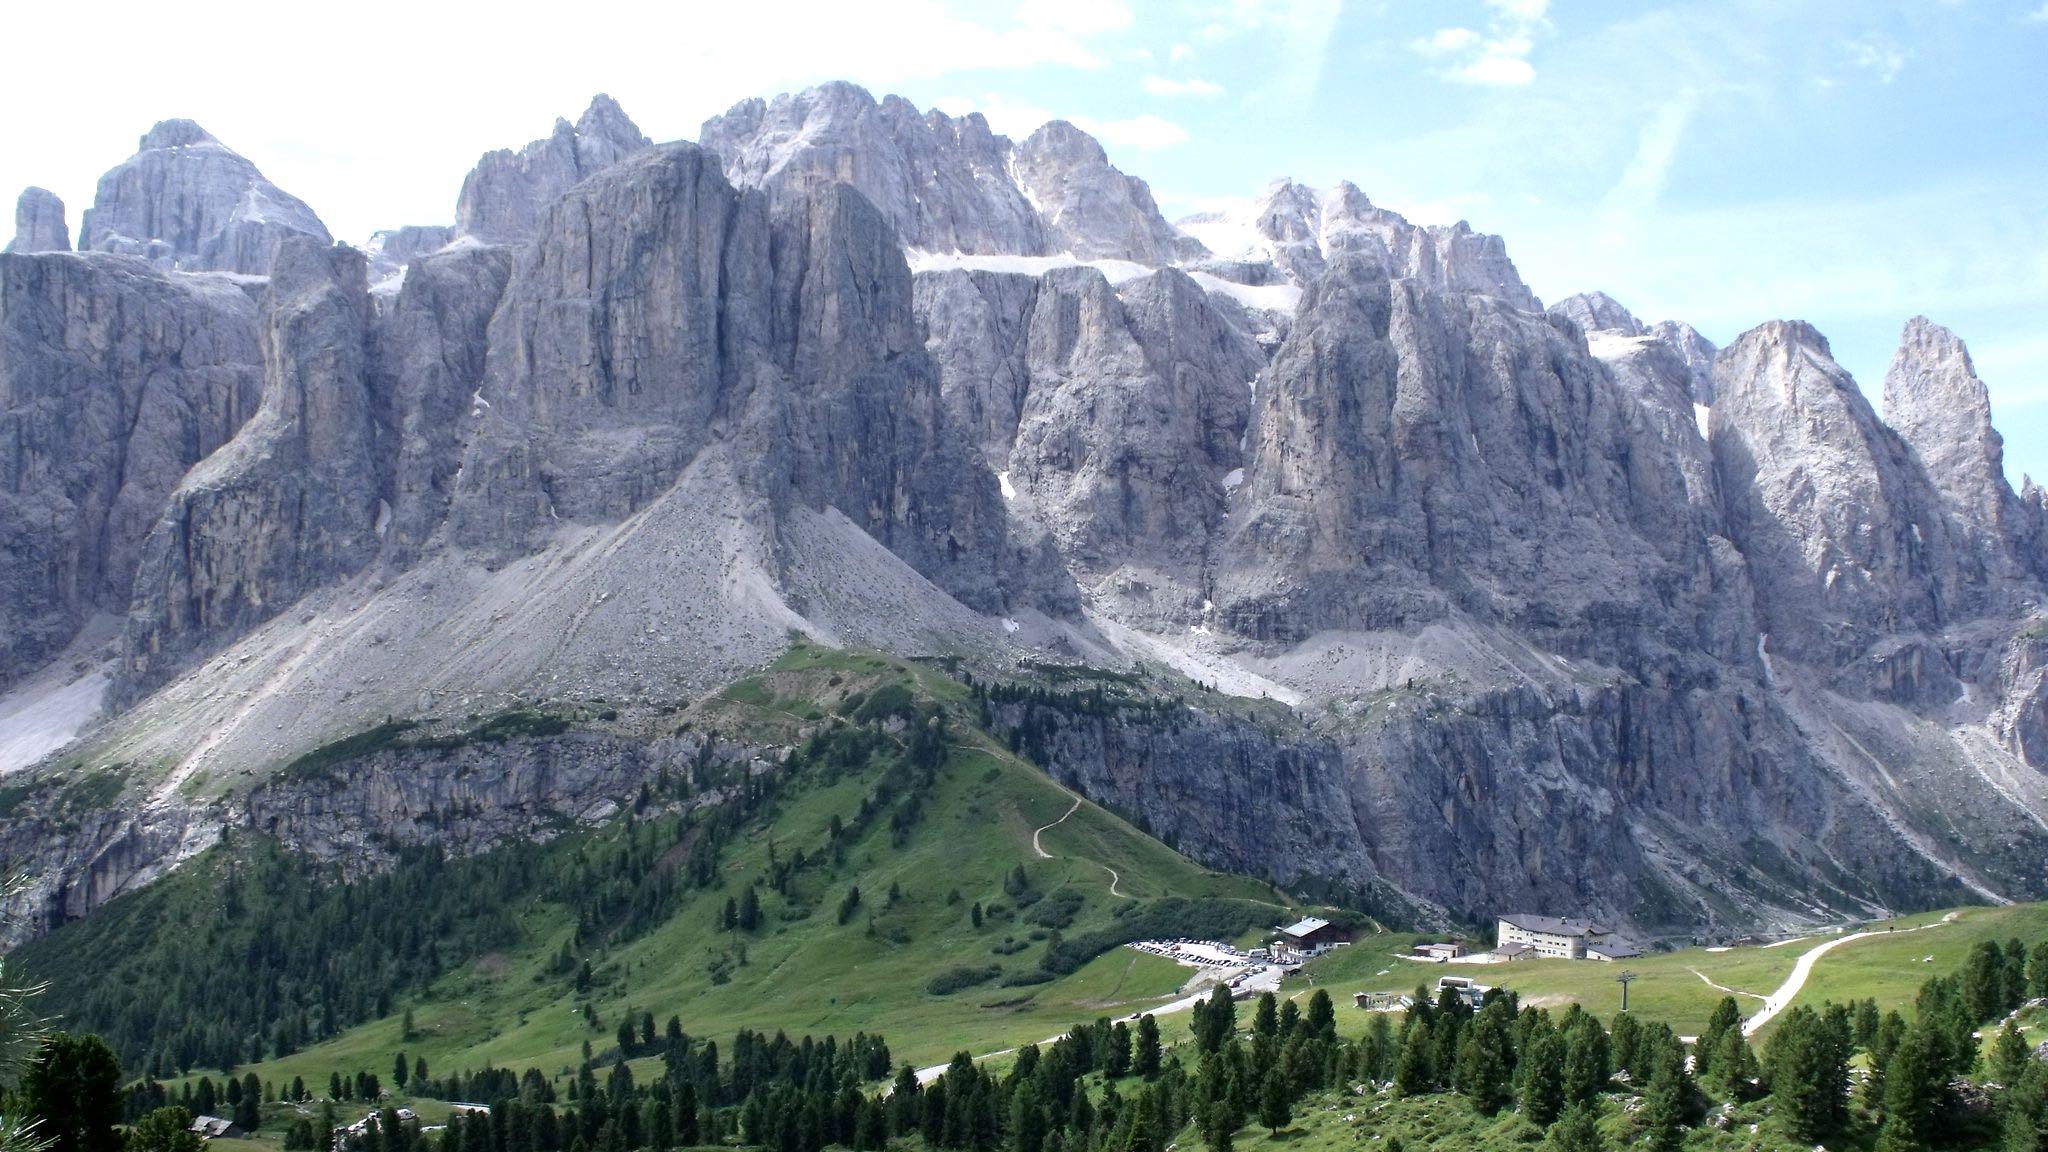 Italy's Dolomite Alps. (Flickr / puffin11k)